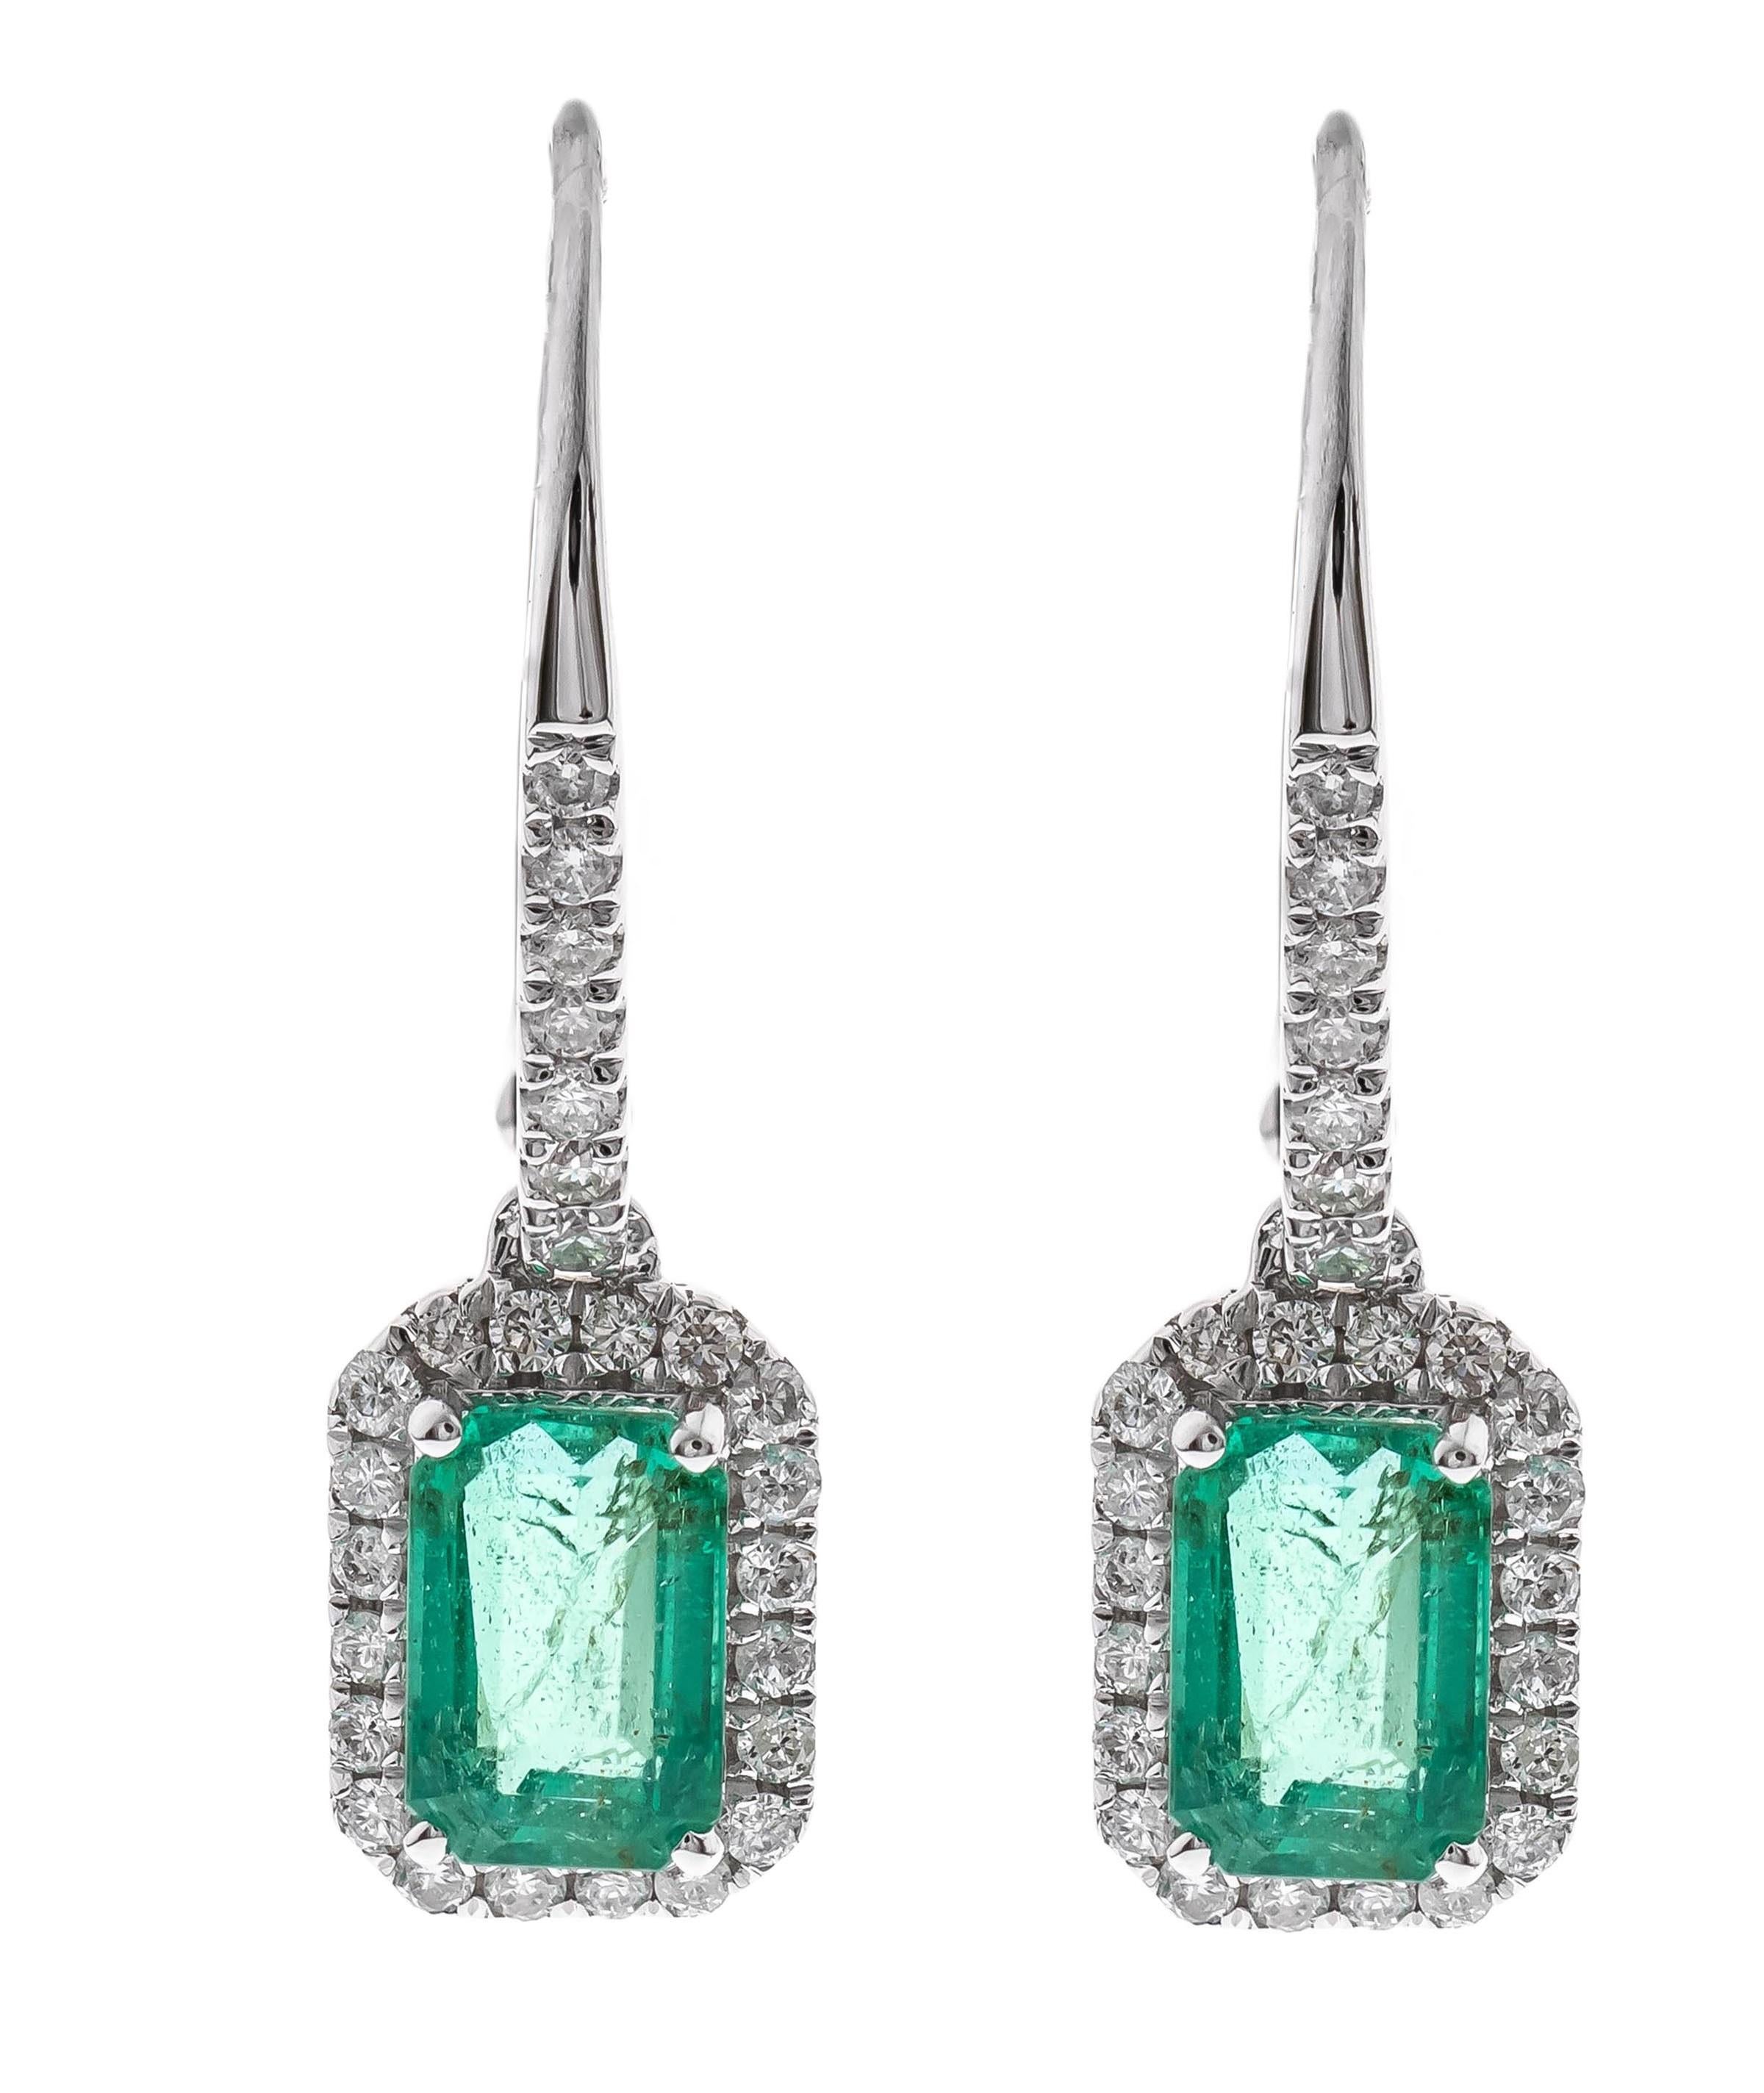 Emerald Cut 1.22 carat Emerald-cut Emerald With Diamond accents 14K White Gold Earring. For Sale